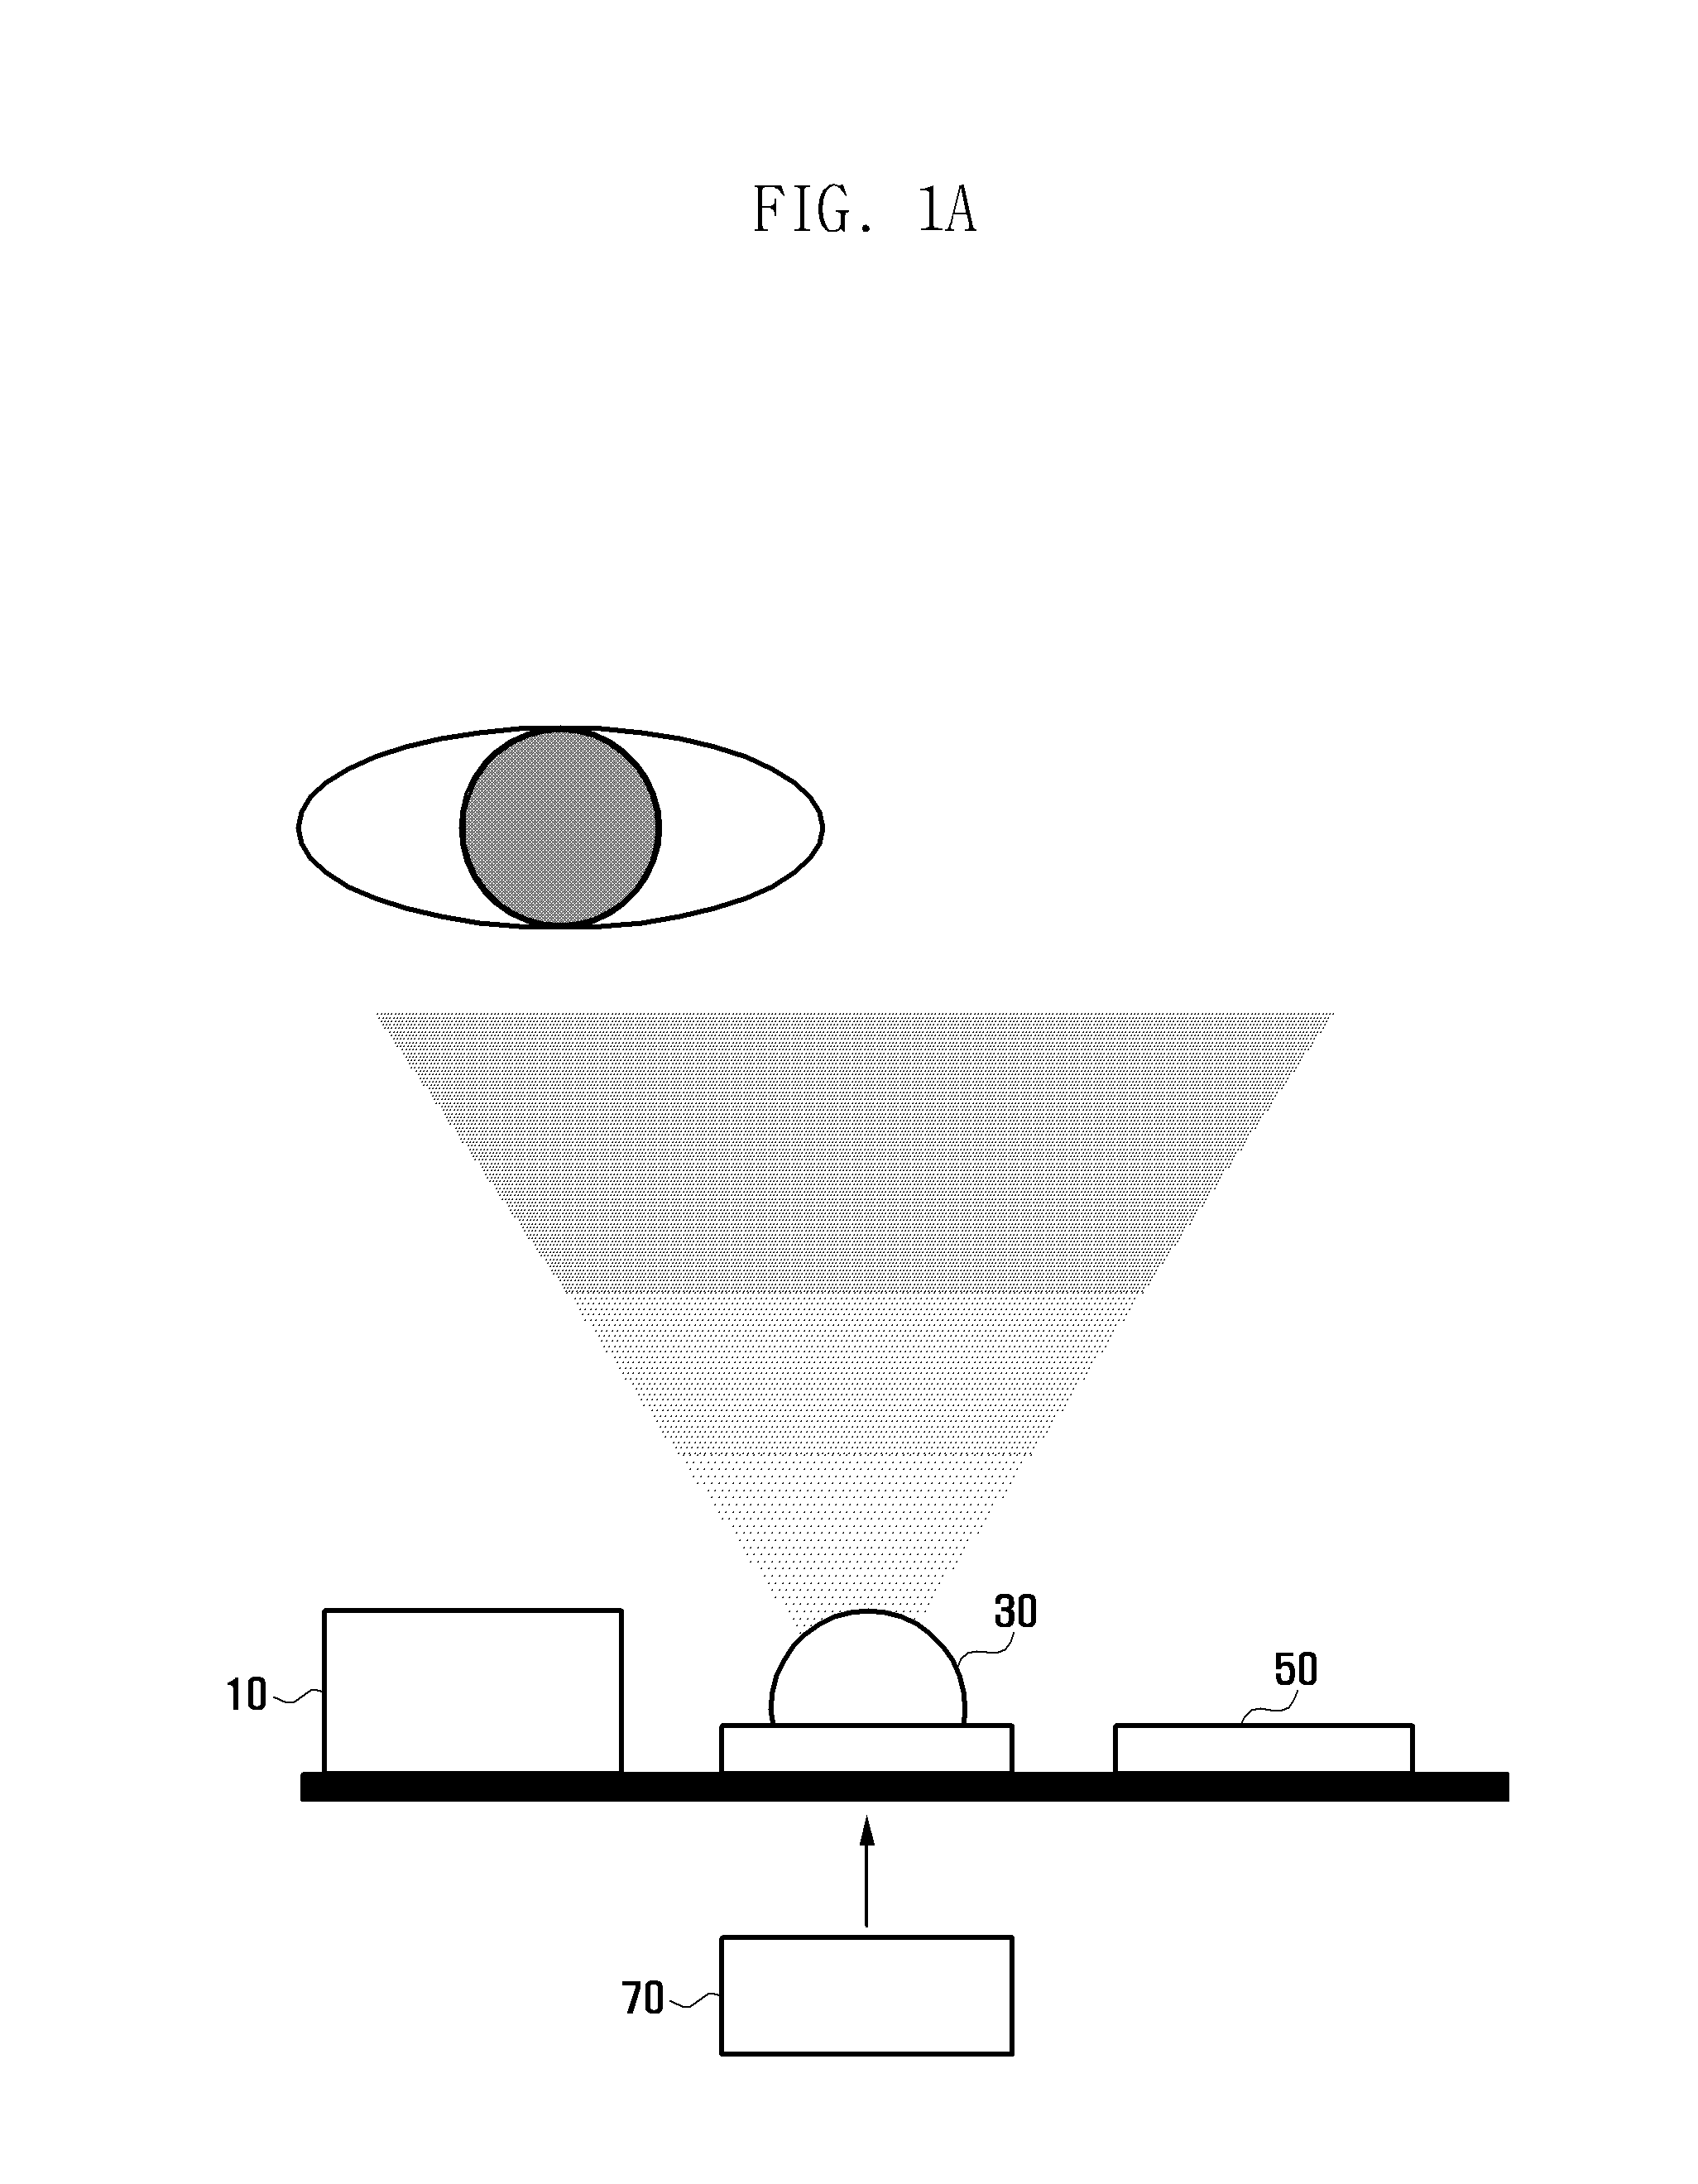 Terminal and method for iris scanning and proximity sensing